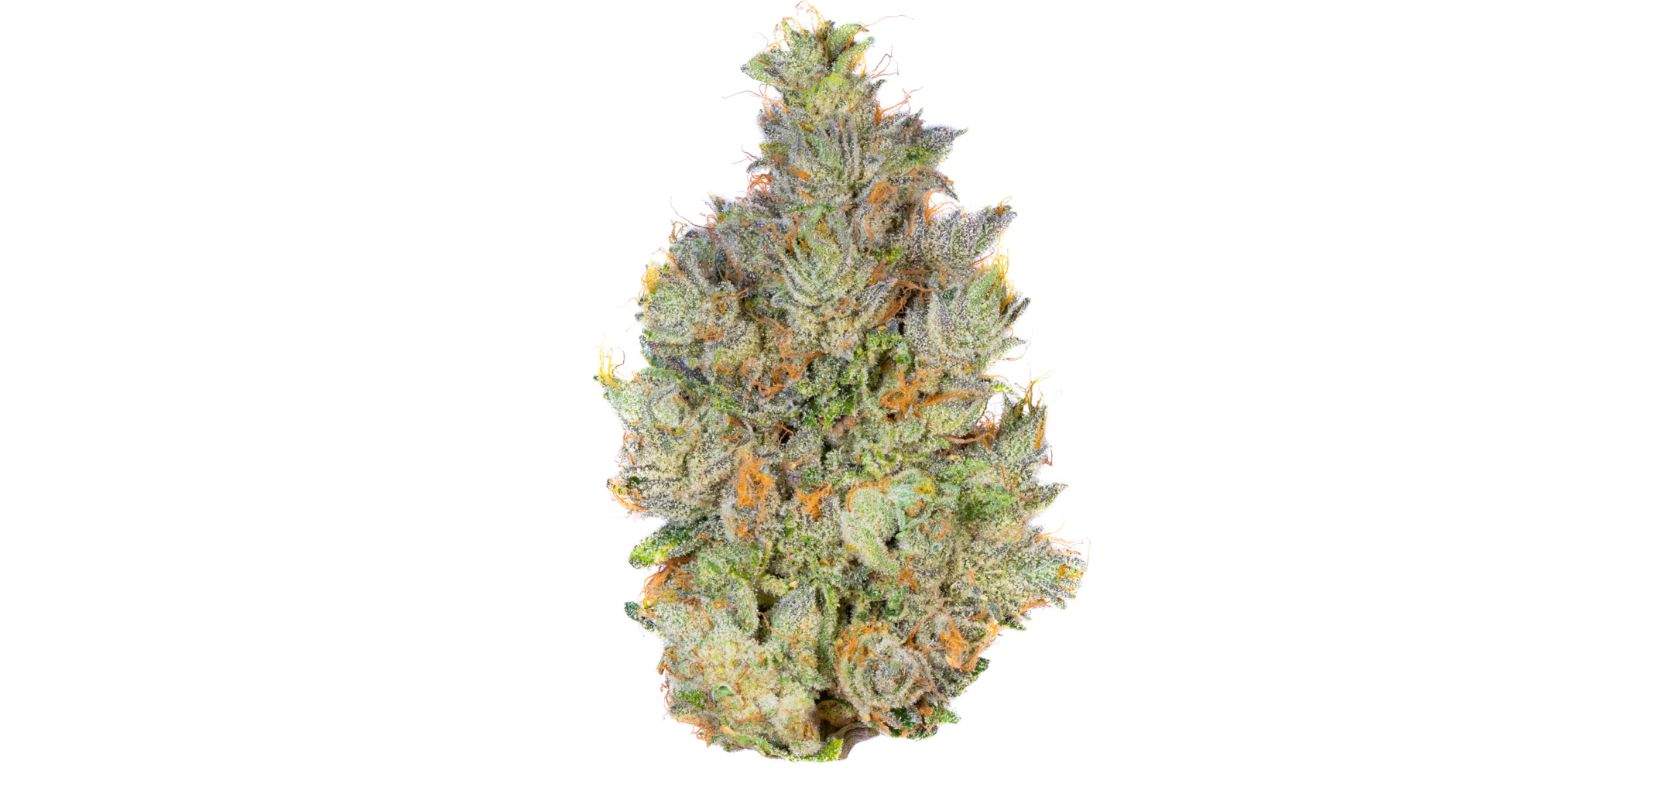 Let’s make this Mac 10 strain review more interesting by suggesting the best online cannabis store to buy weed online in Canada.